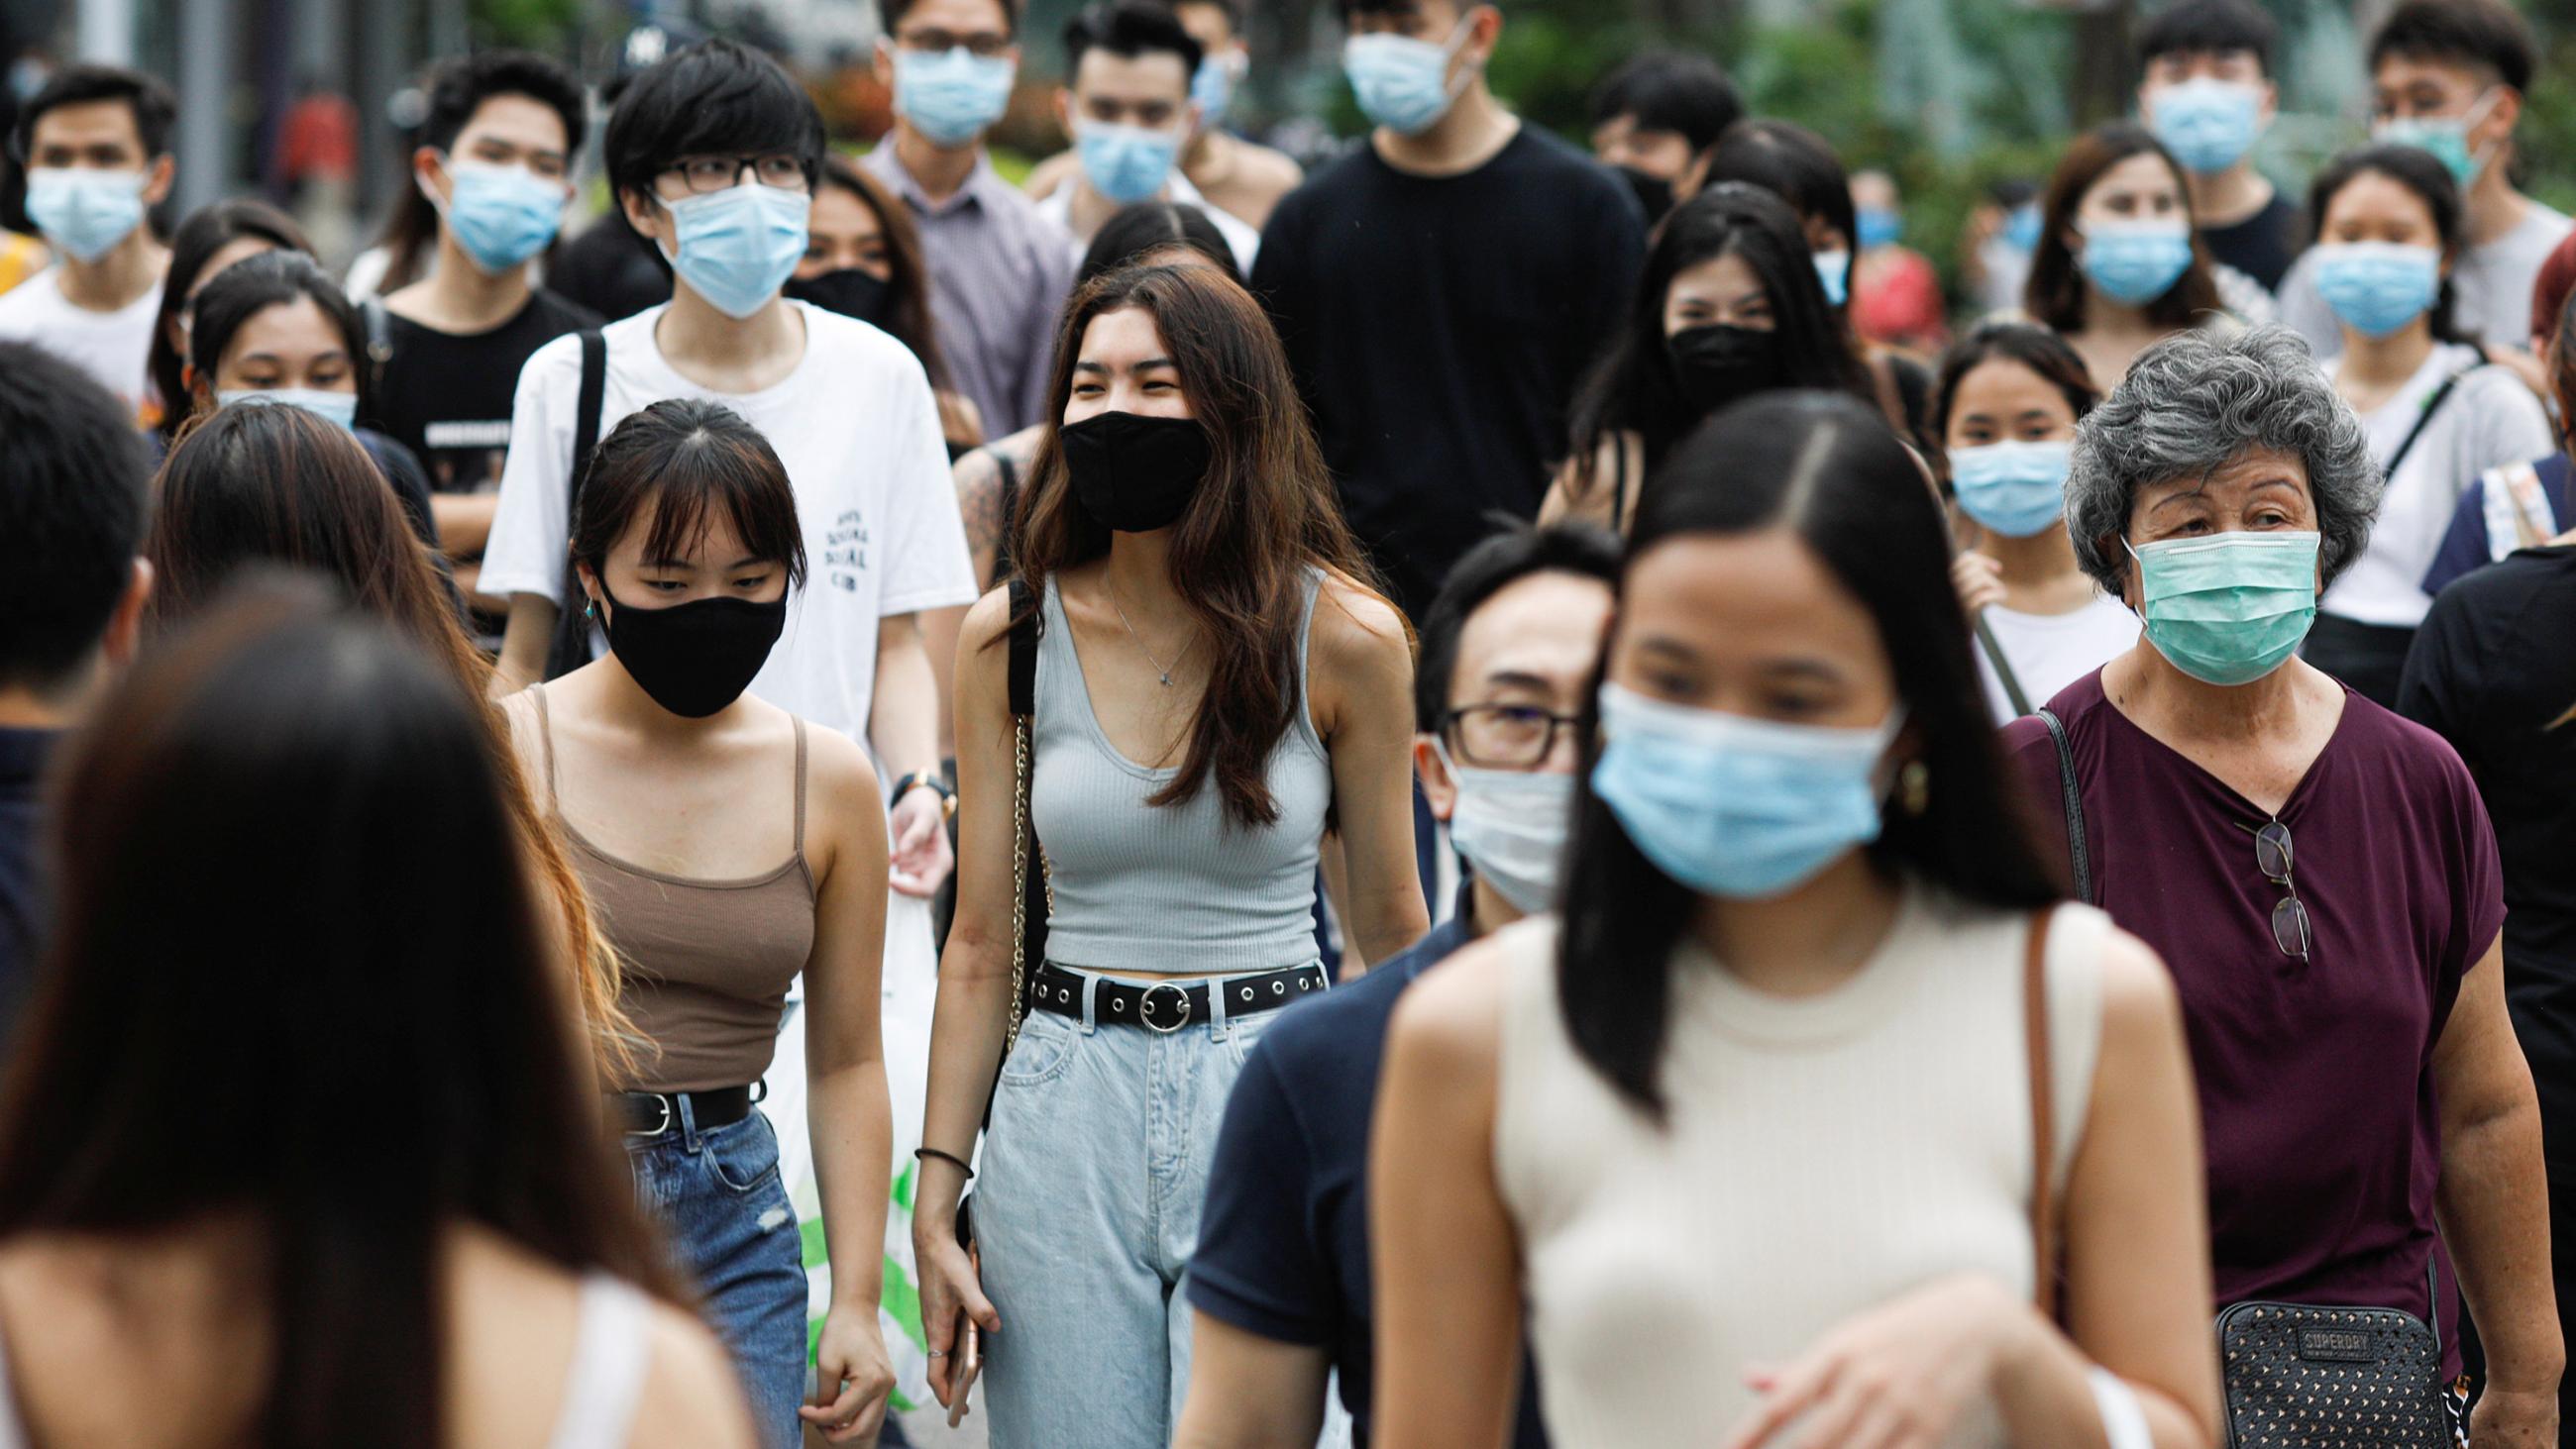 The photo shows a busy street bustling with foot traffic, and strikingly every single person appears to be wearing a mask. The photo shows 